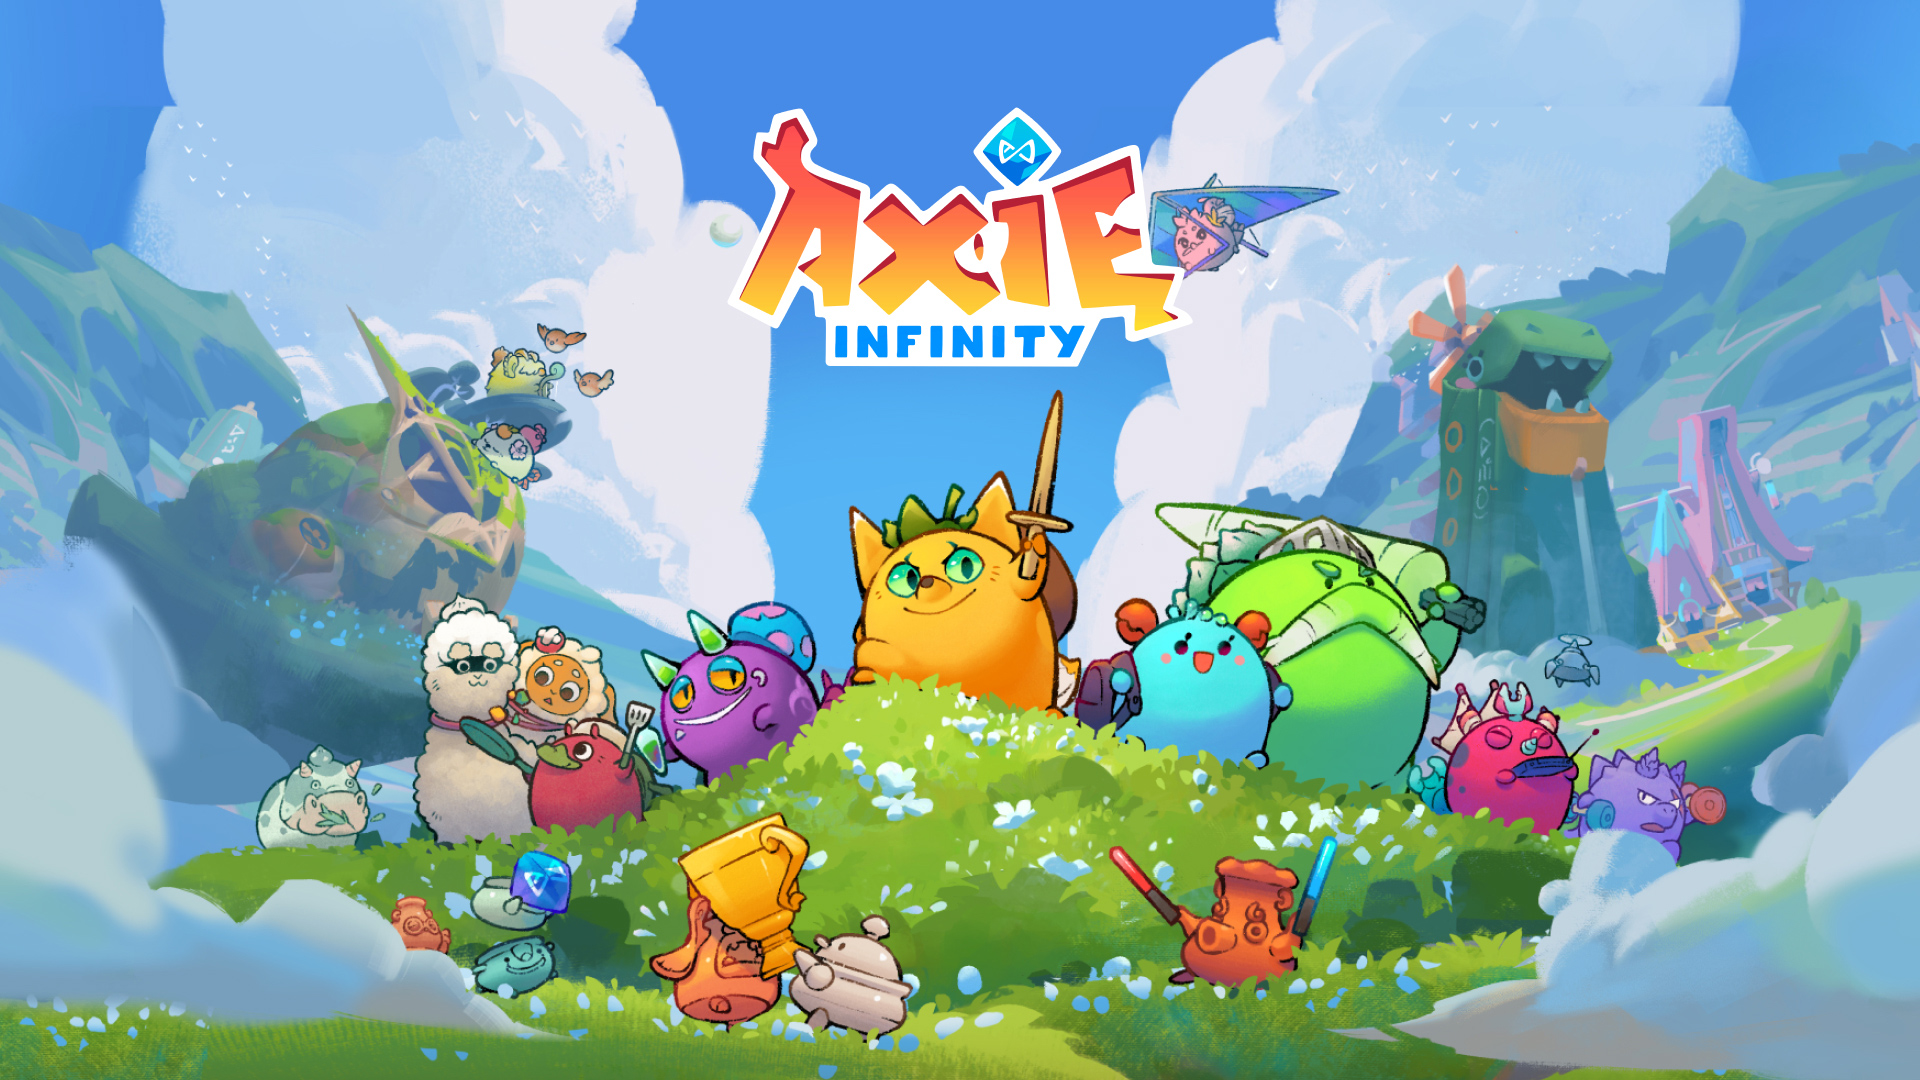 Common cryptocurrency terms - Axie Infinity